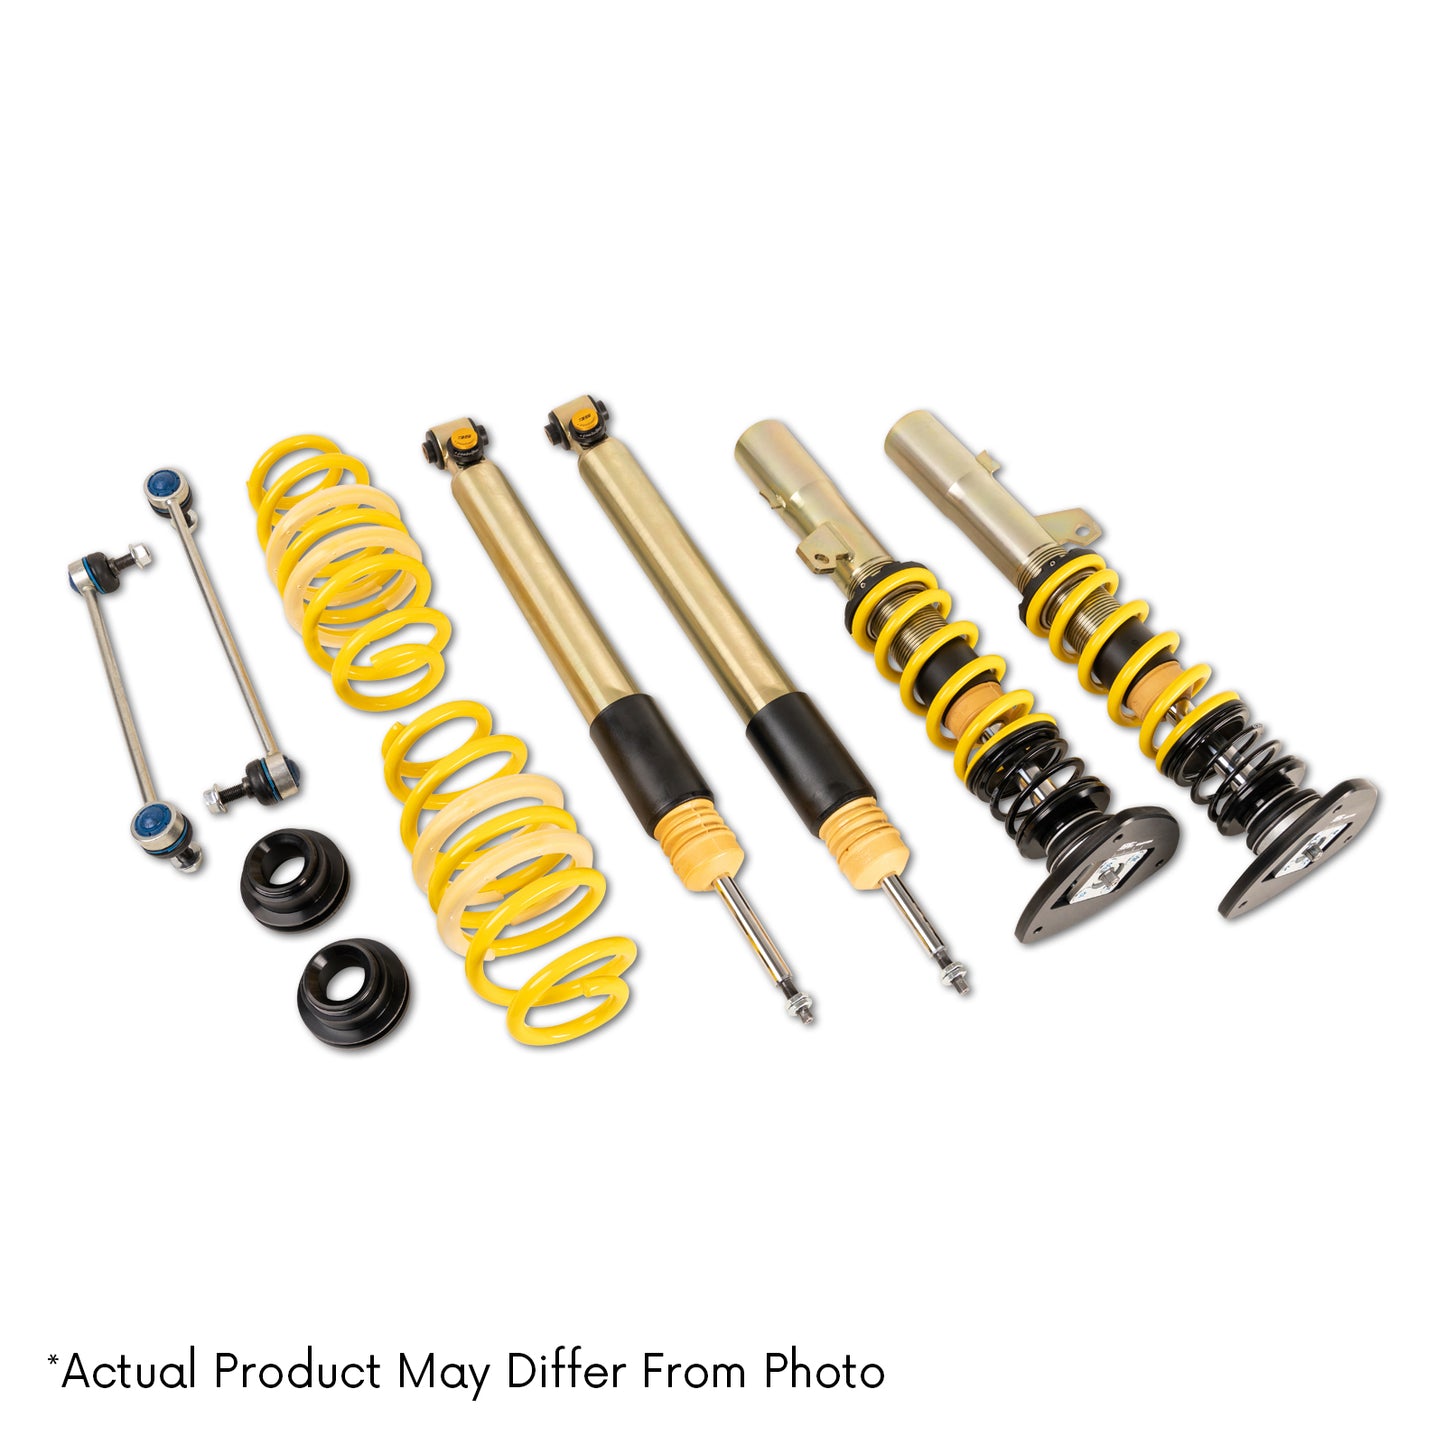 ST Suspensions 1820230879 ST XTA Plus 3 Coilover Kit - 2018+ Ford Mustang (S-550); without electronics dampers